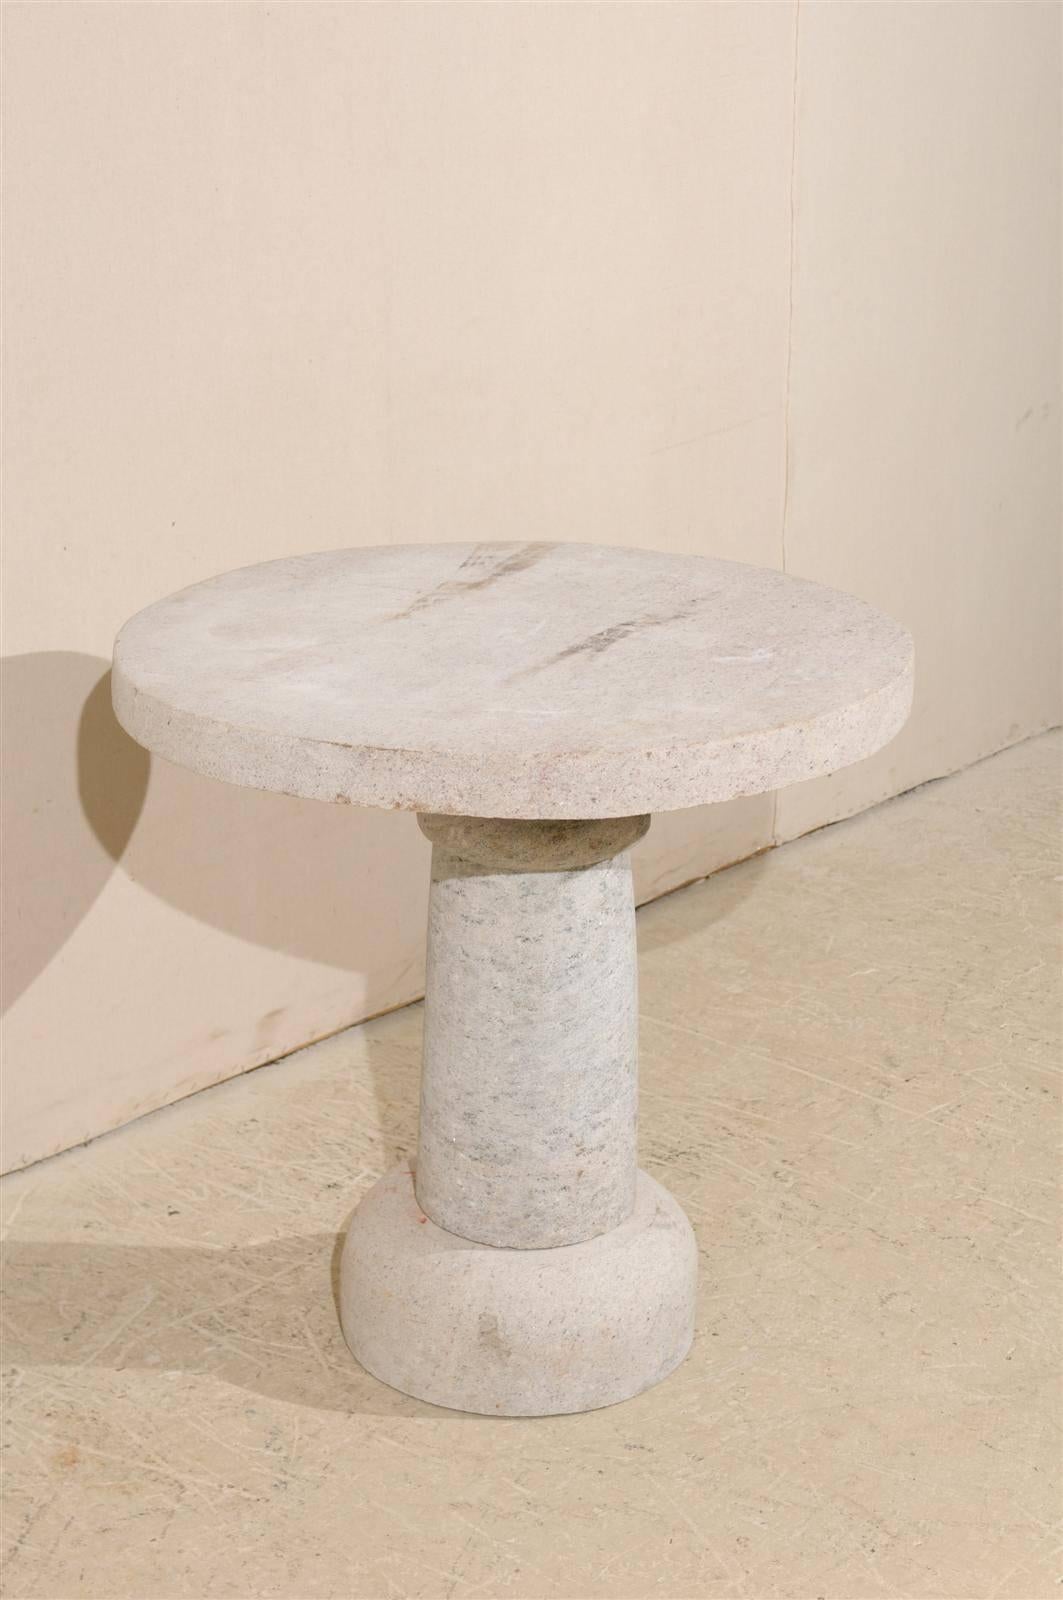 Hand-Crafted Round Granite Contemporary Indoor/Outdoor Pedestal Table, Handmade